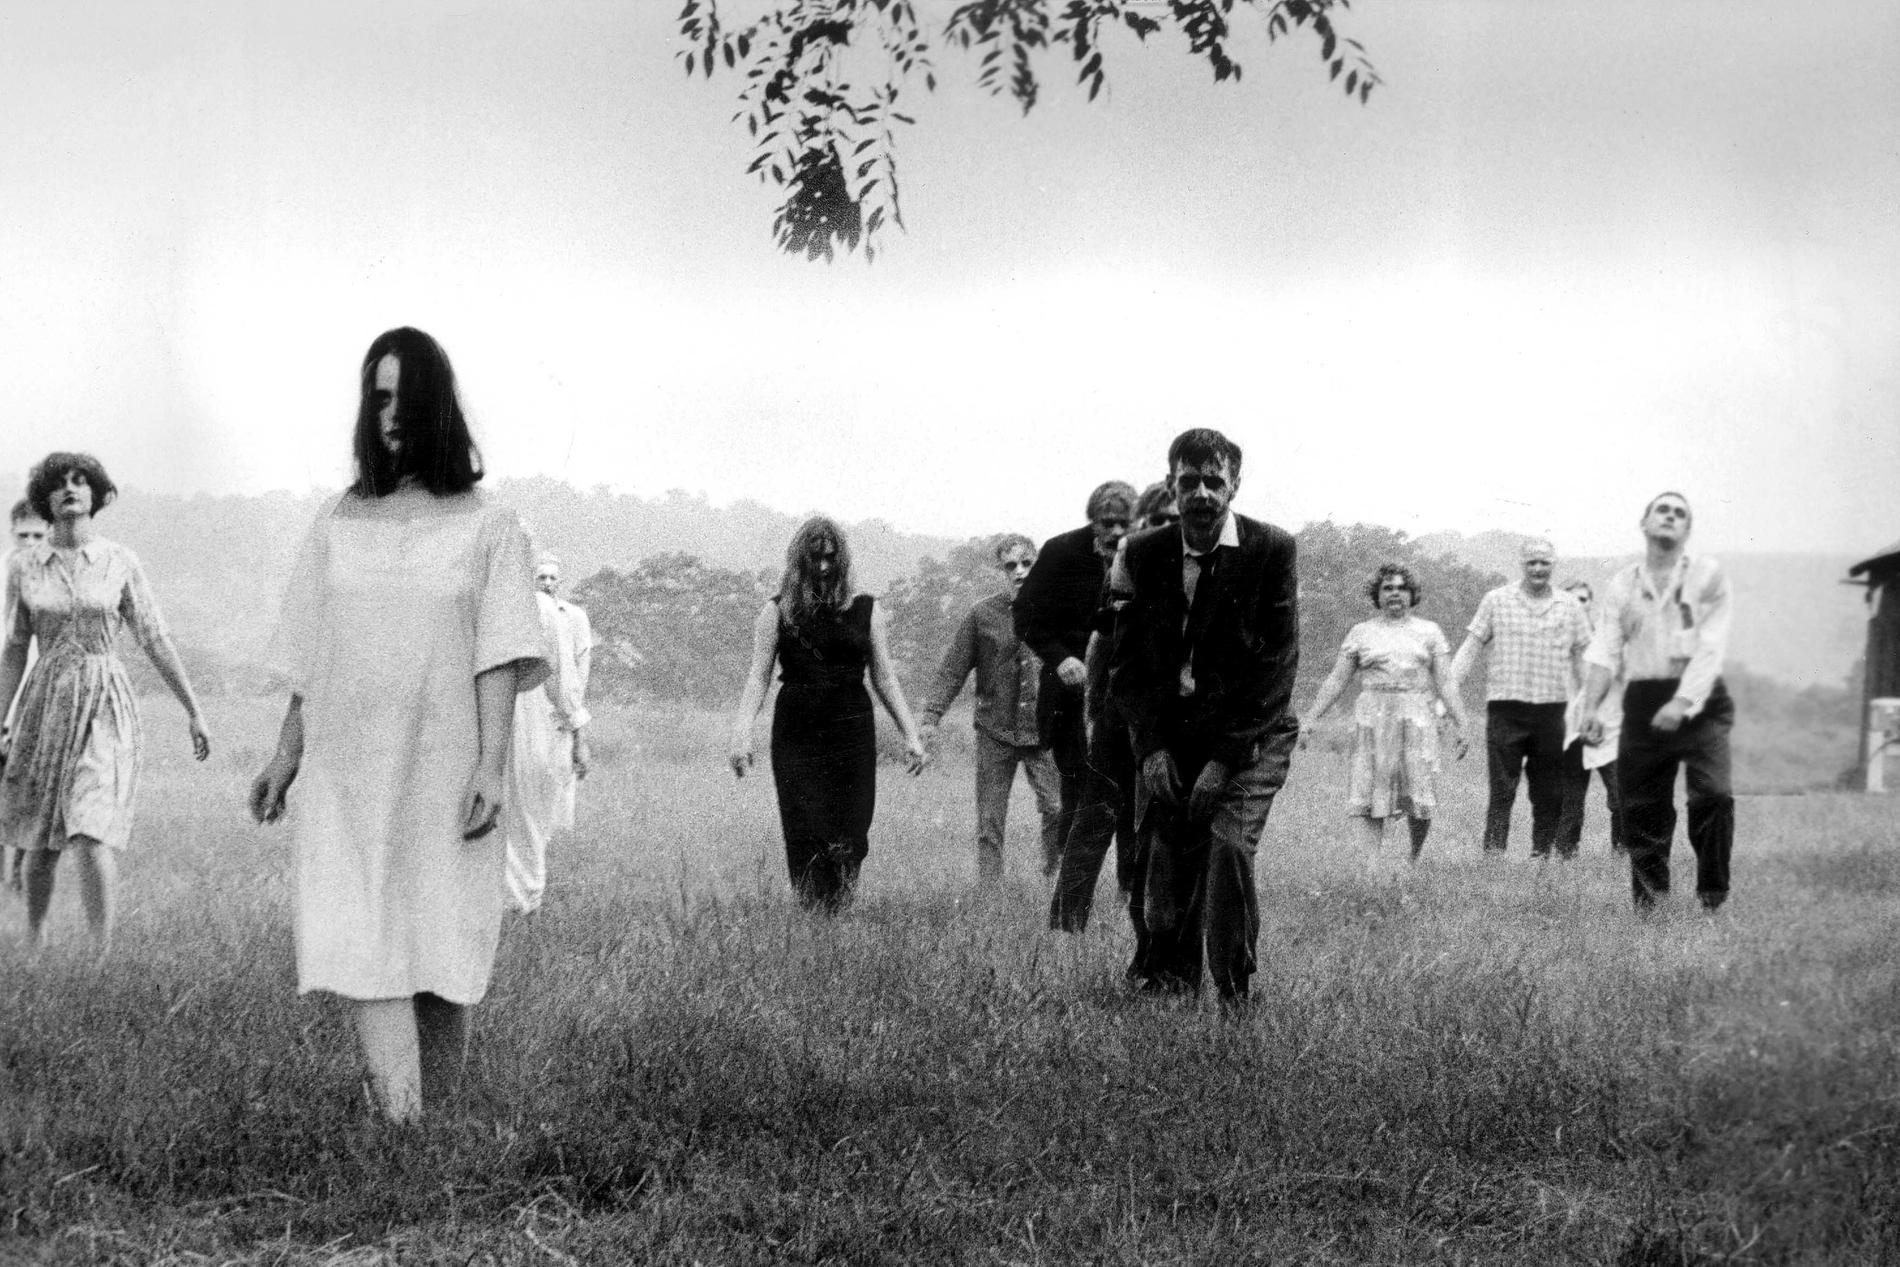 ”Night of the living dead”.